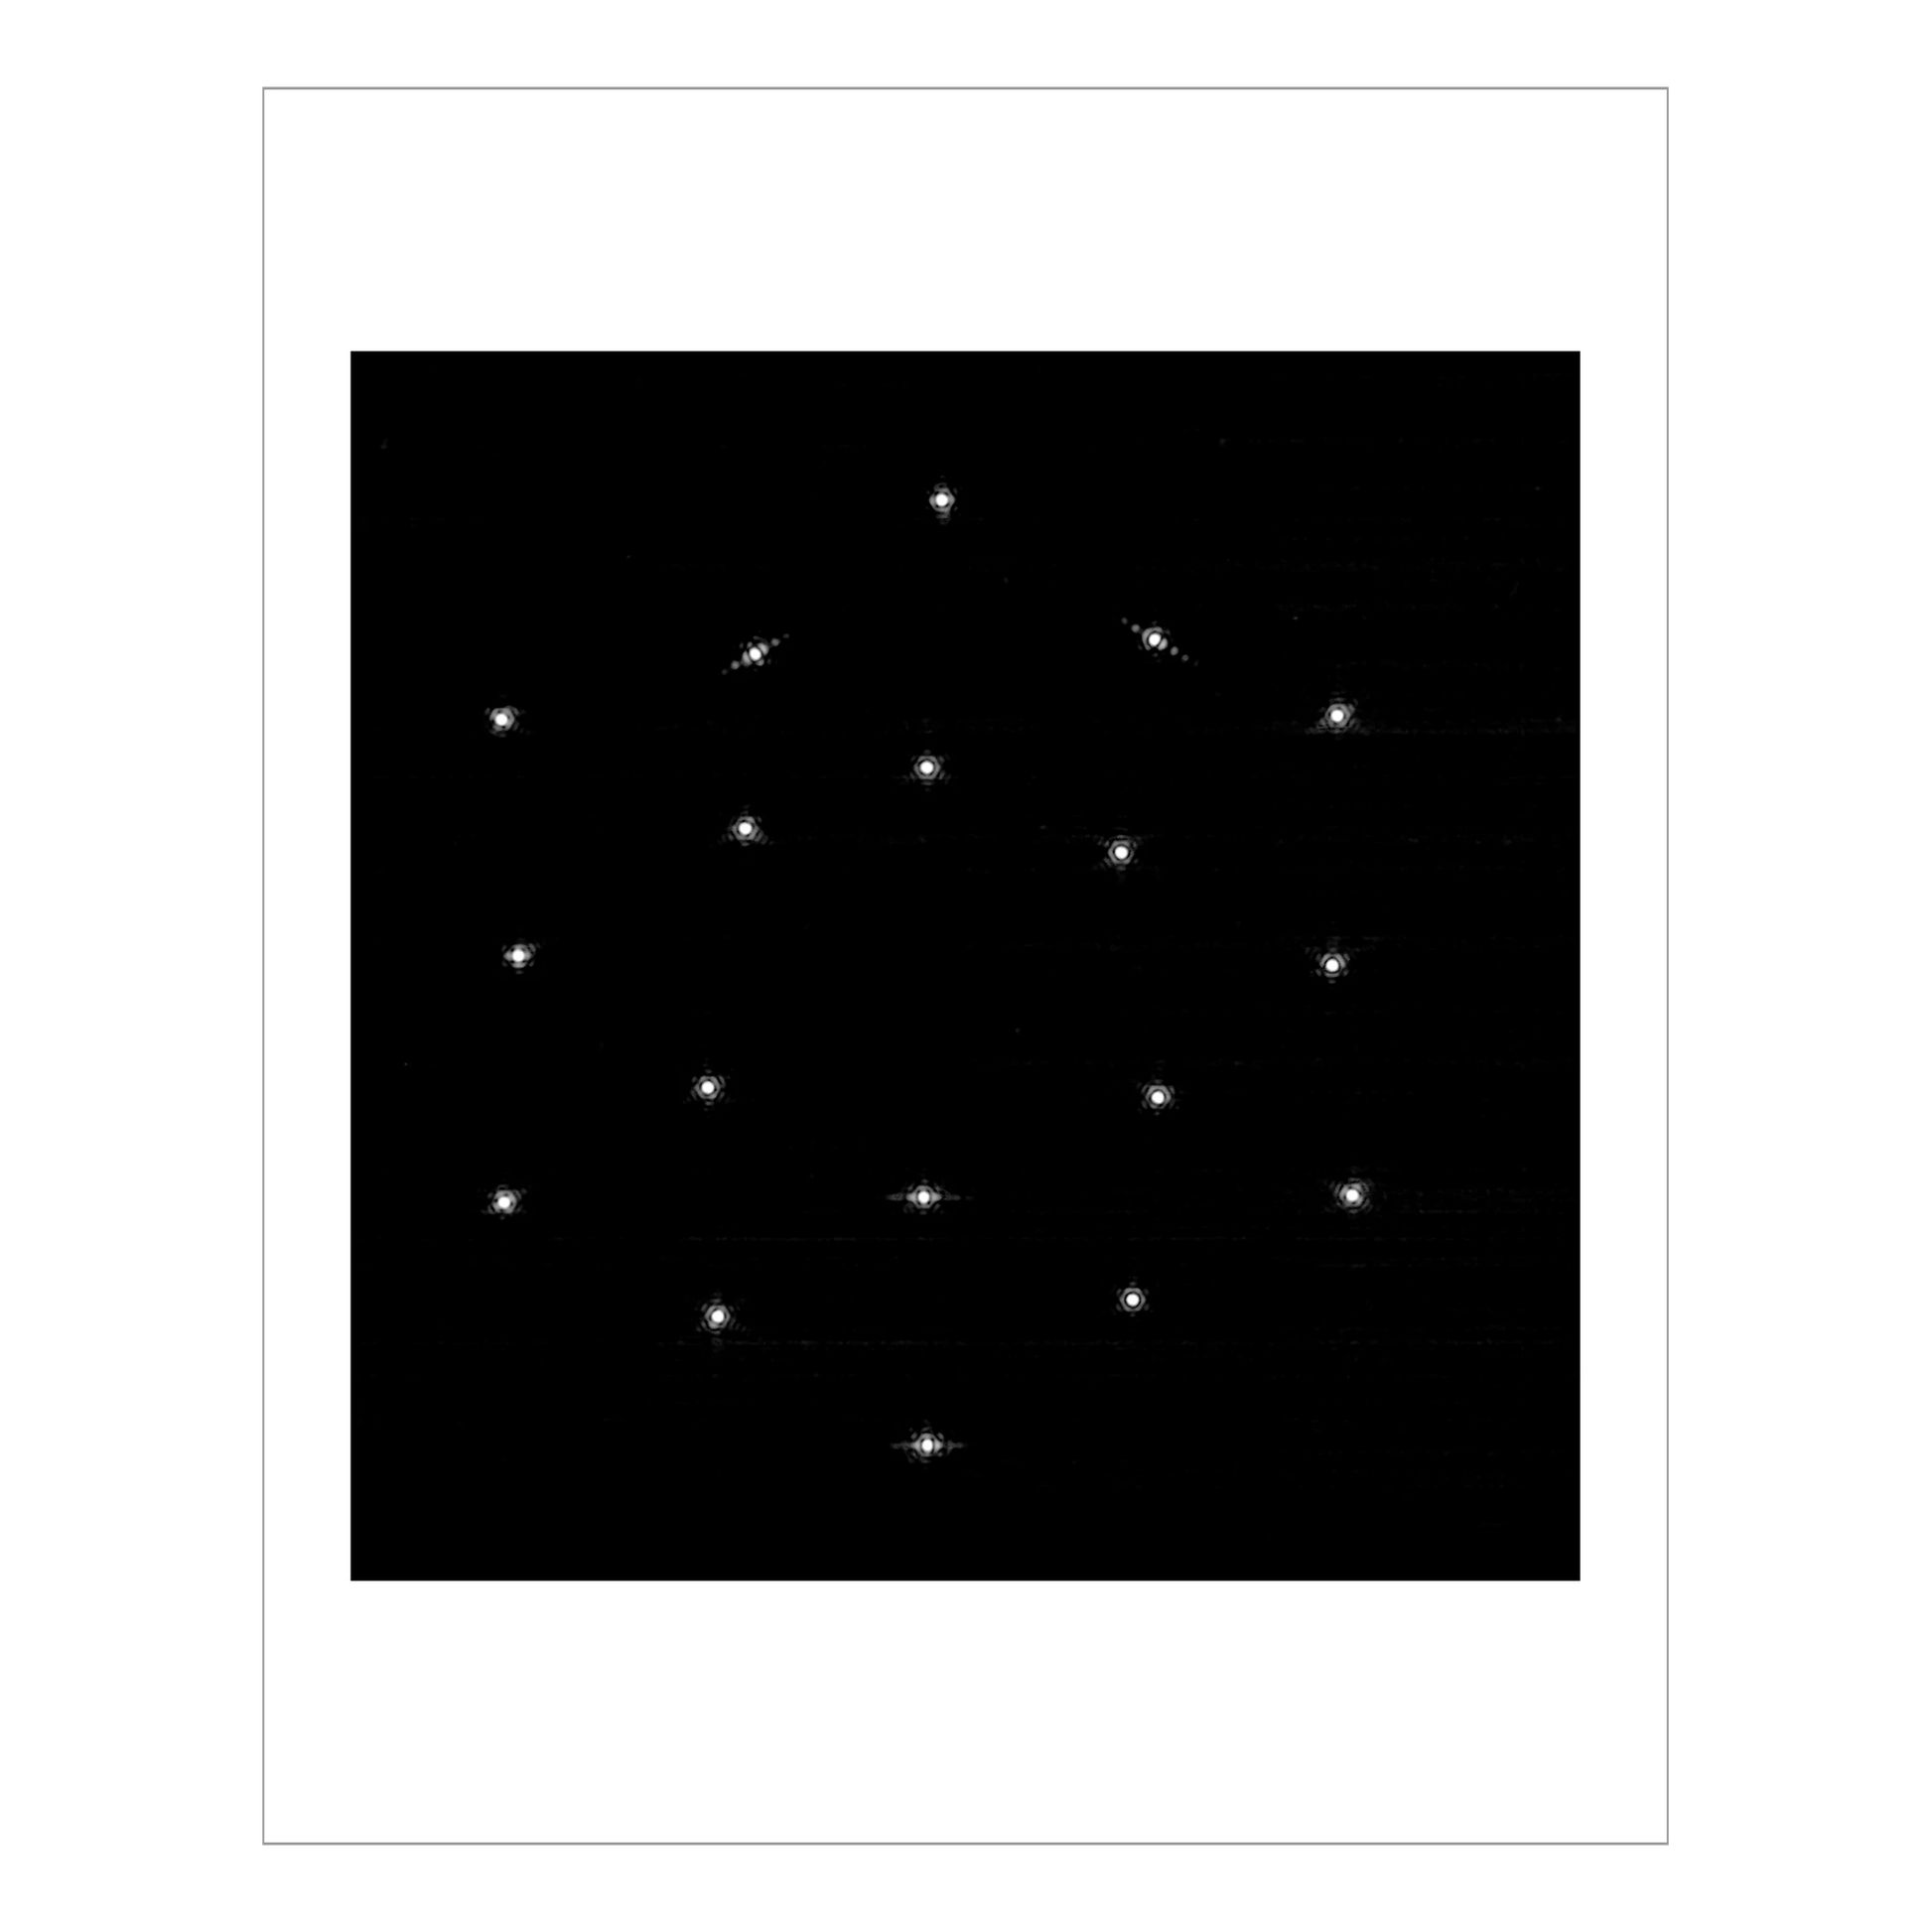 The same star repeated 18 times, once for each of the Webb’s mirrors, into a hexagonal formation.